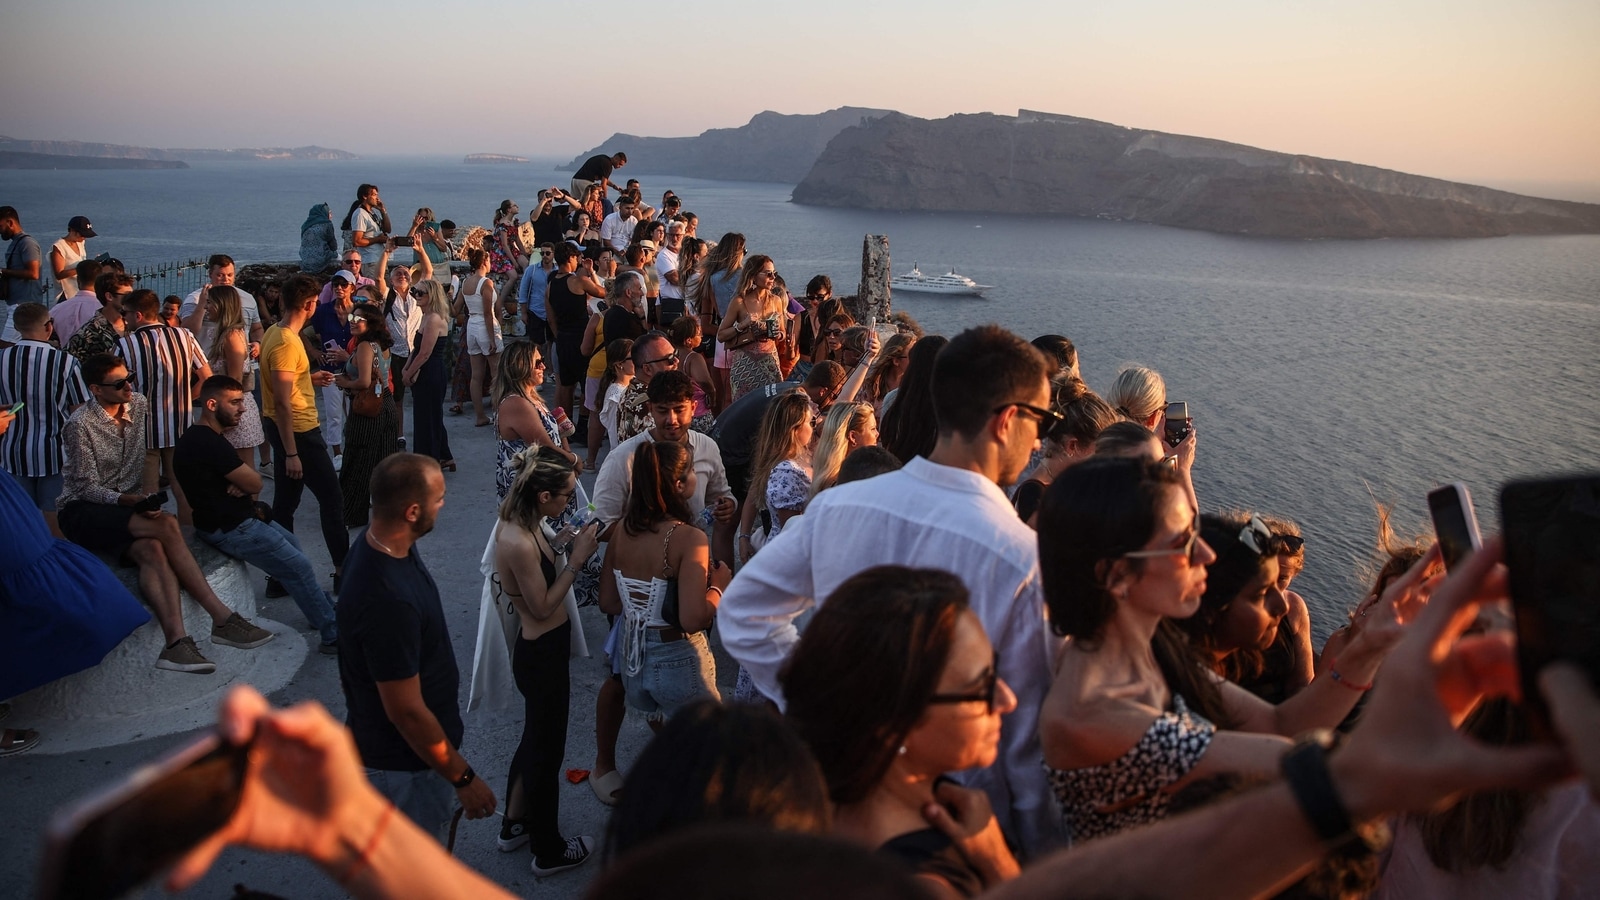 Balancing beauty and tourism: Santorini faces the challenge of managing record-breaking visitor numbers | Travel